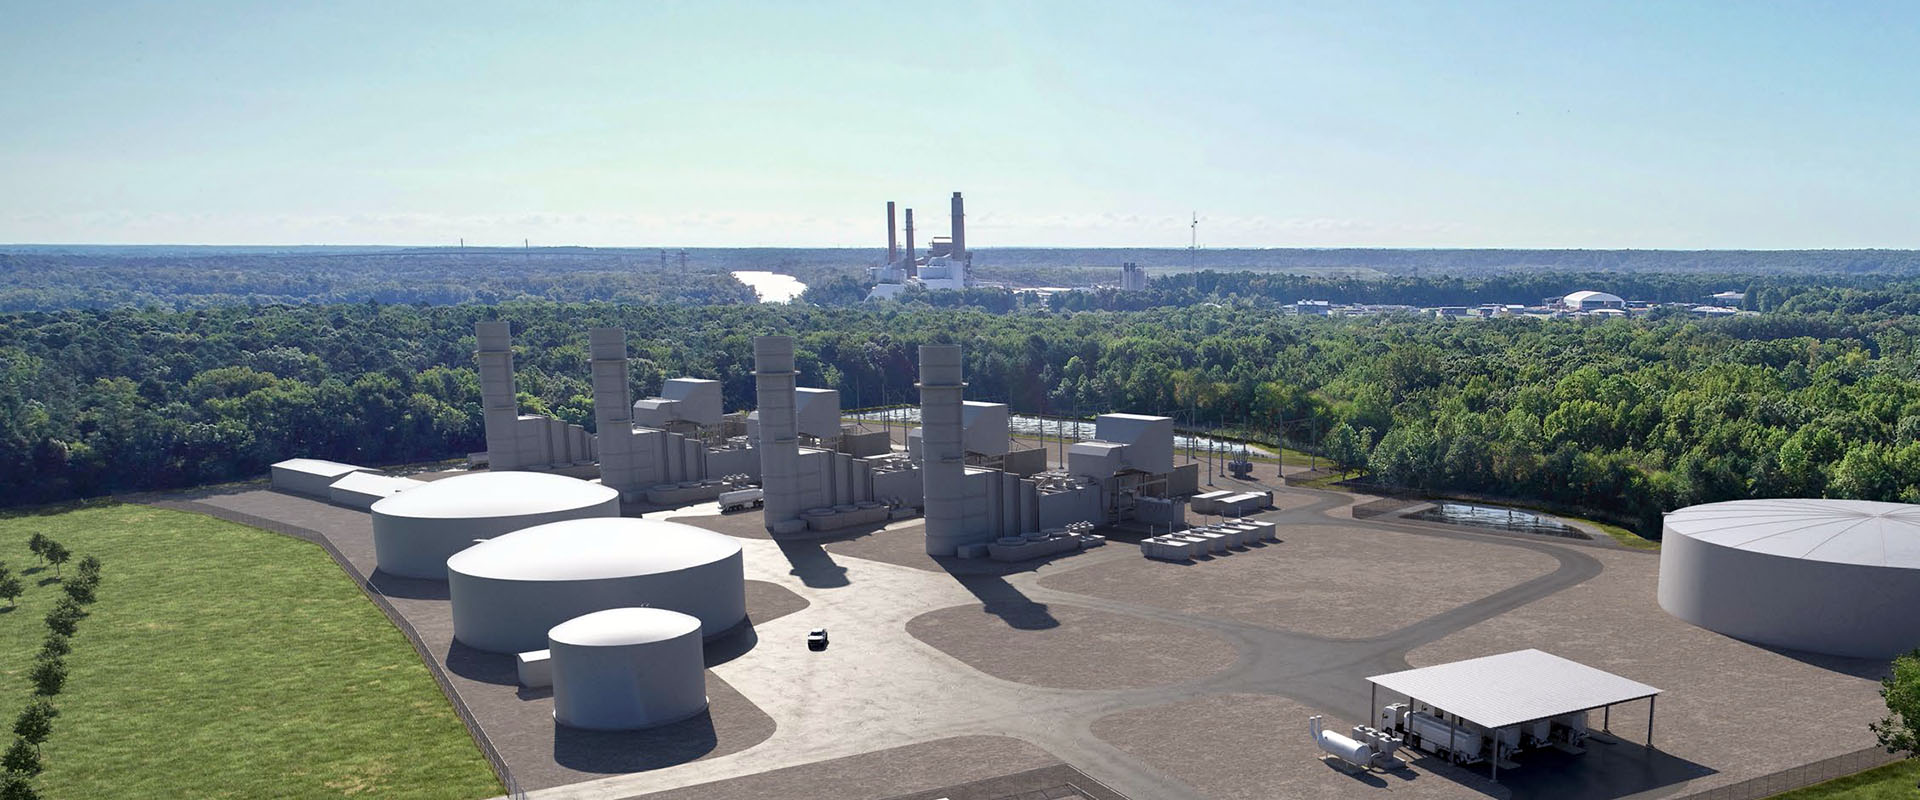 proposed Chesterfield Energy Reliability Center rendering